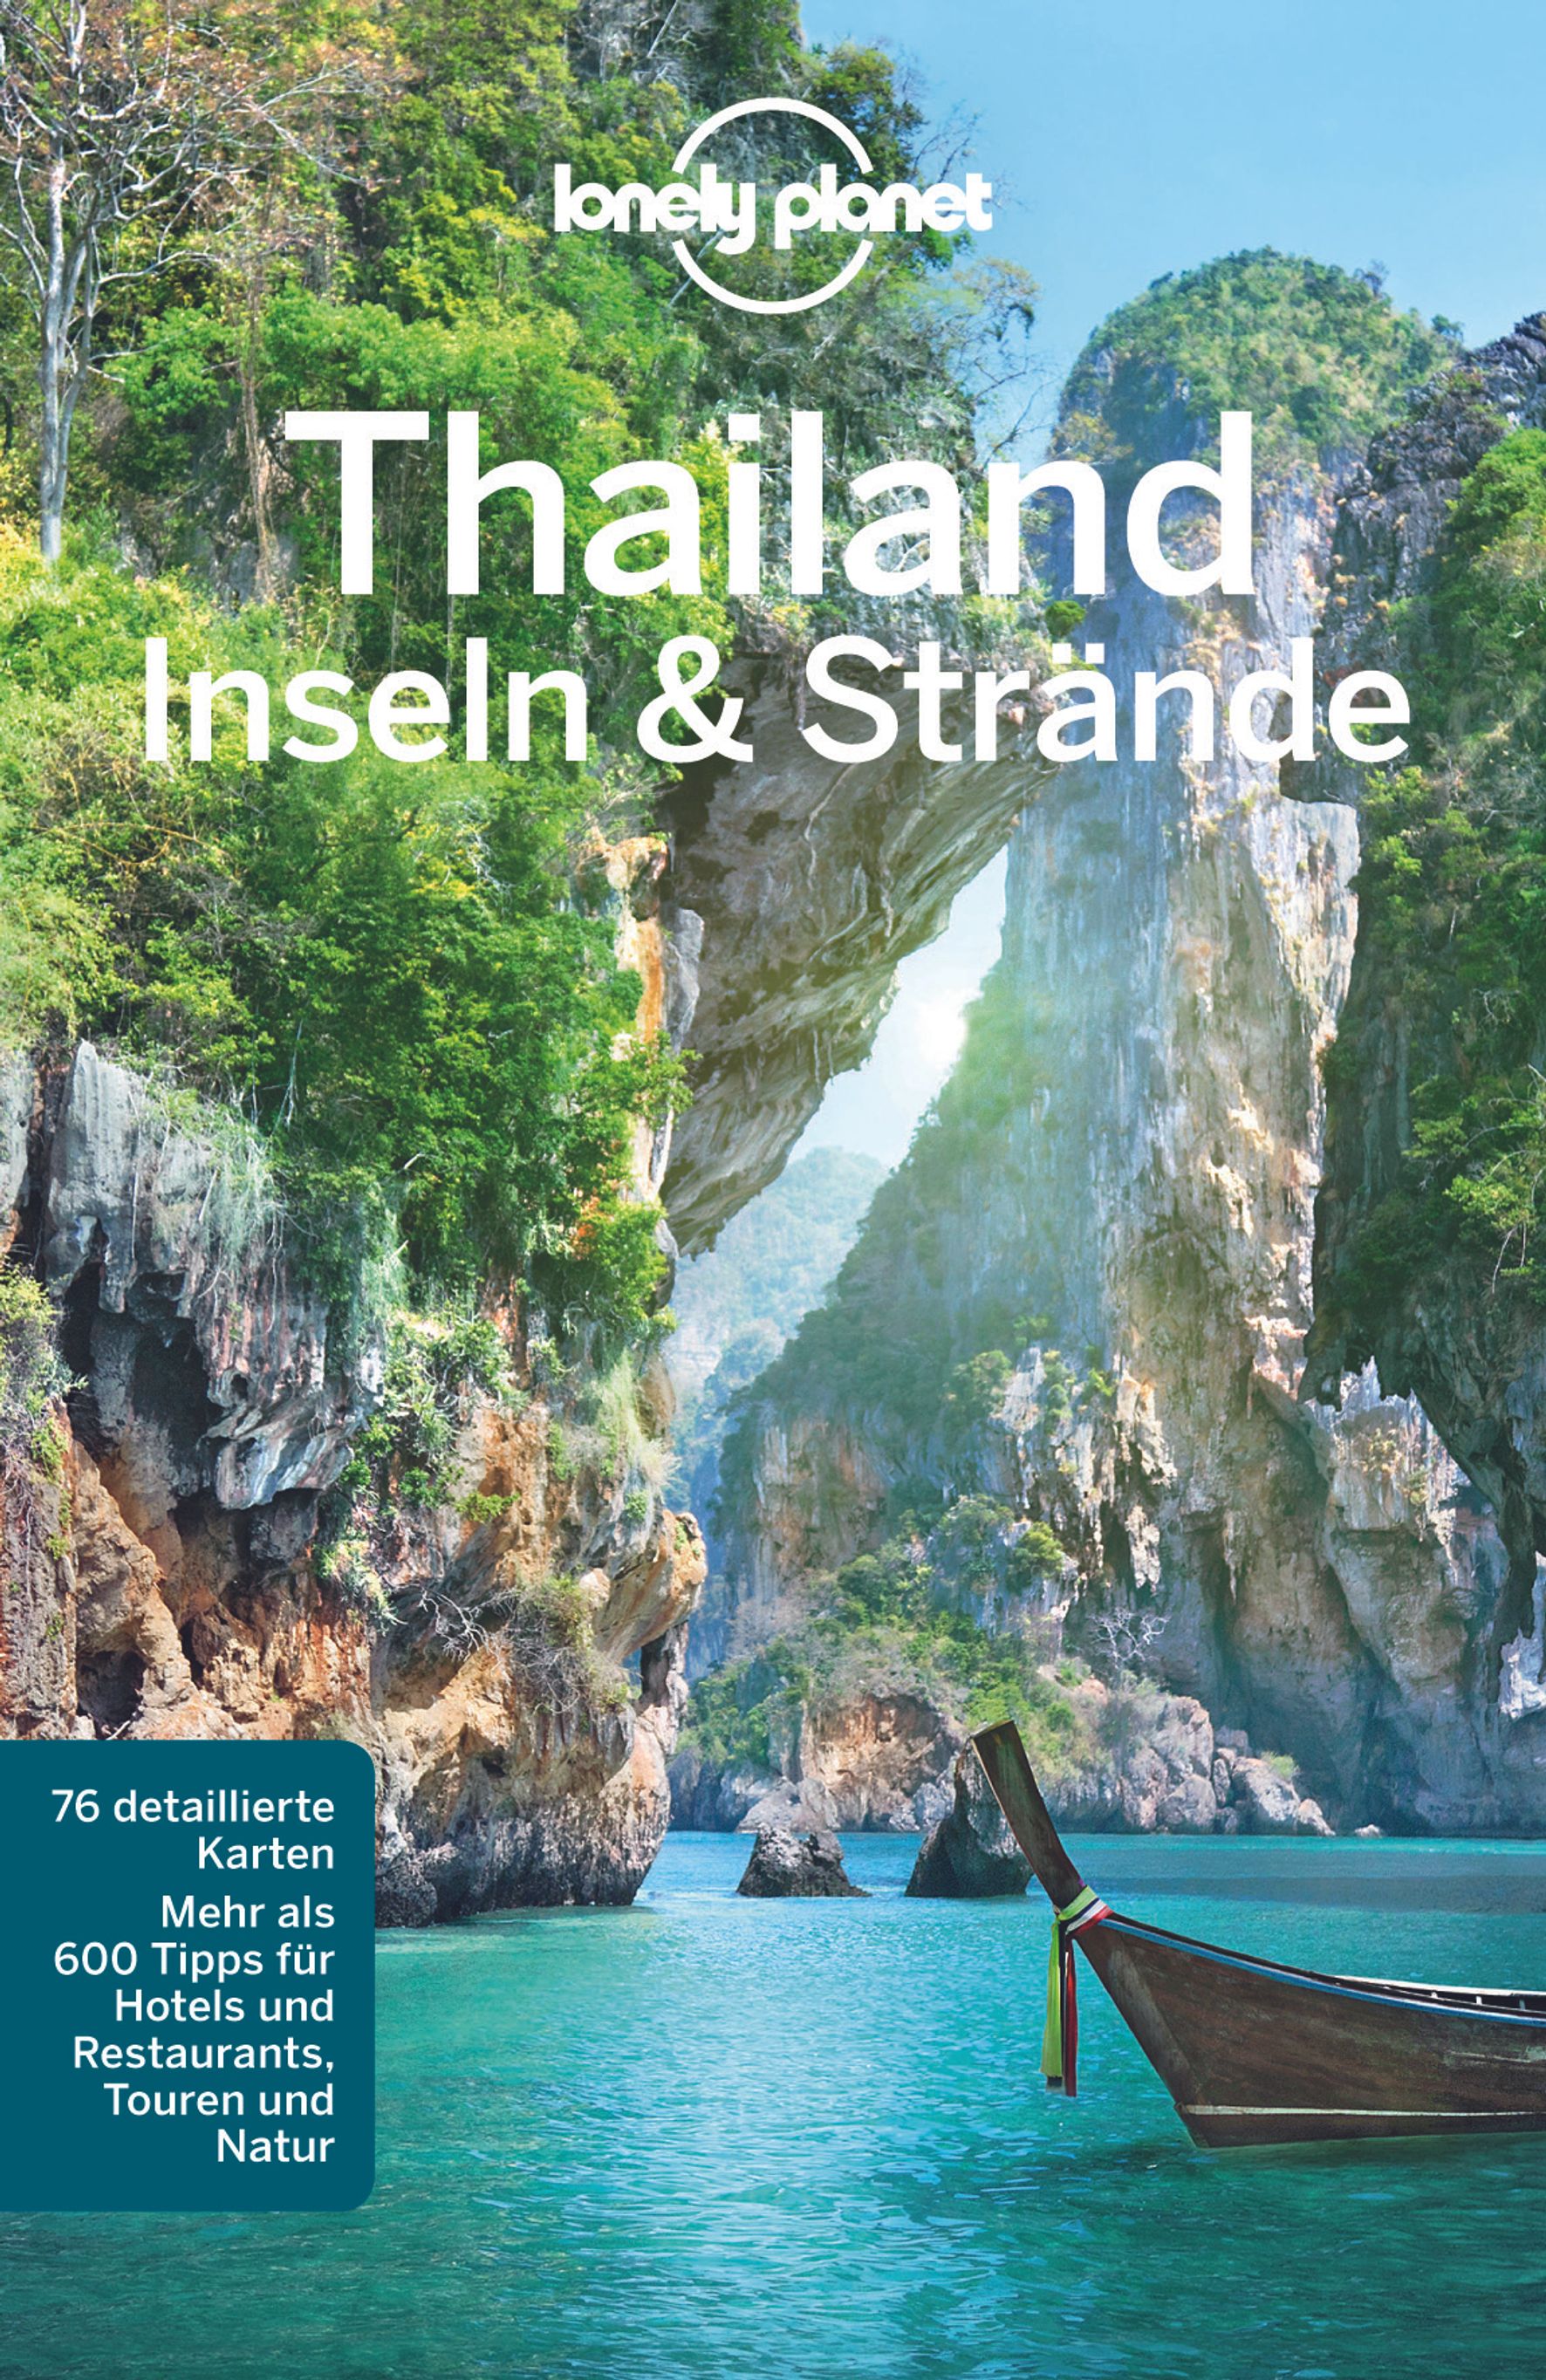 Lonely Planet Lonely Planet Thailand Inseln & Strände (eBook)